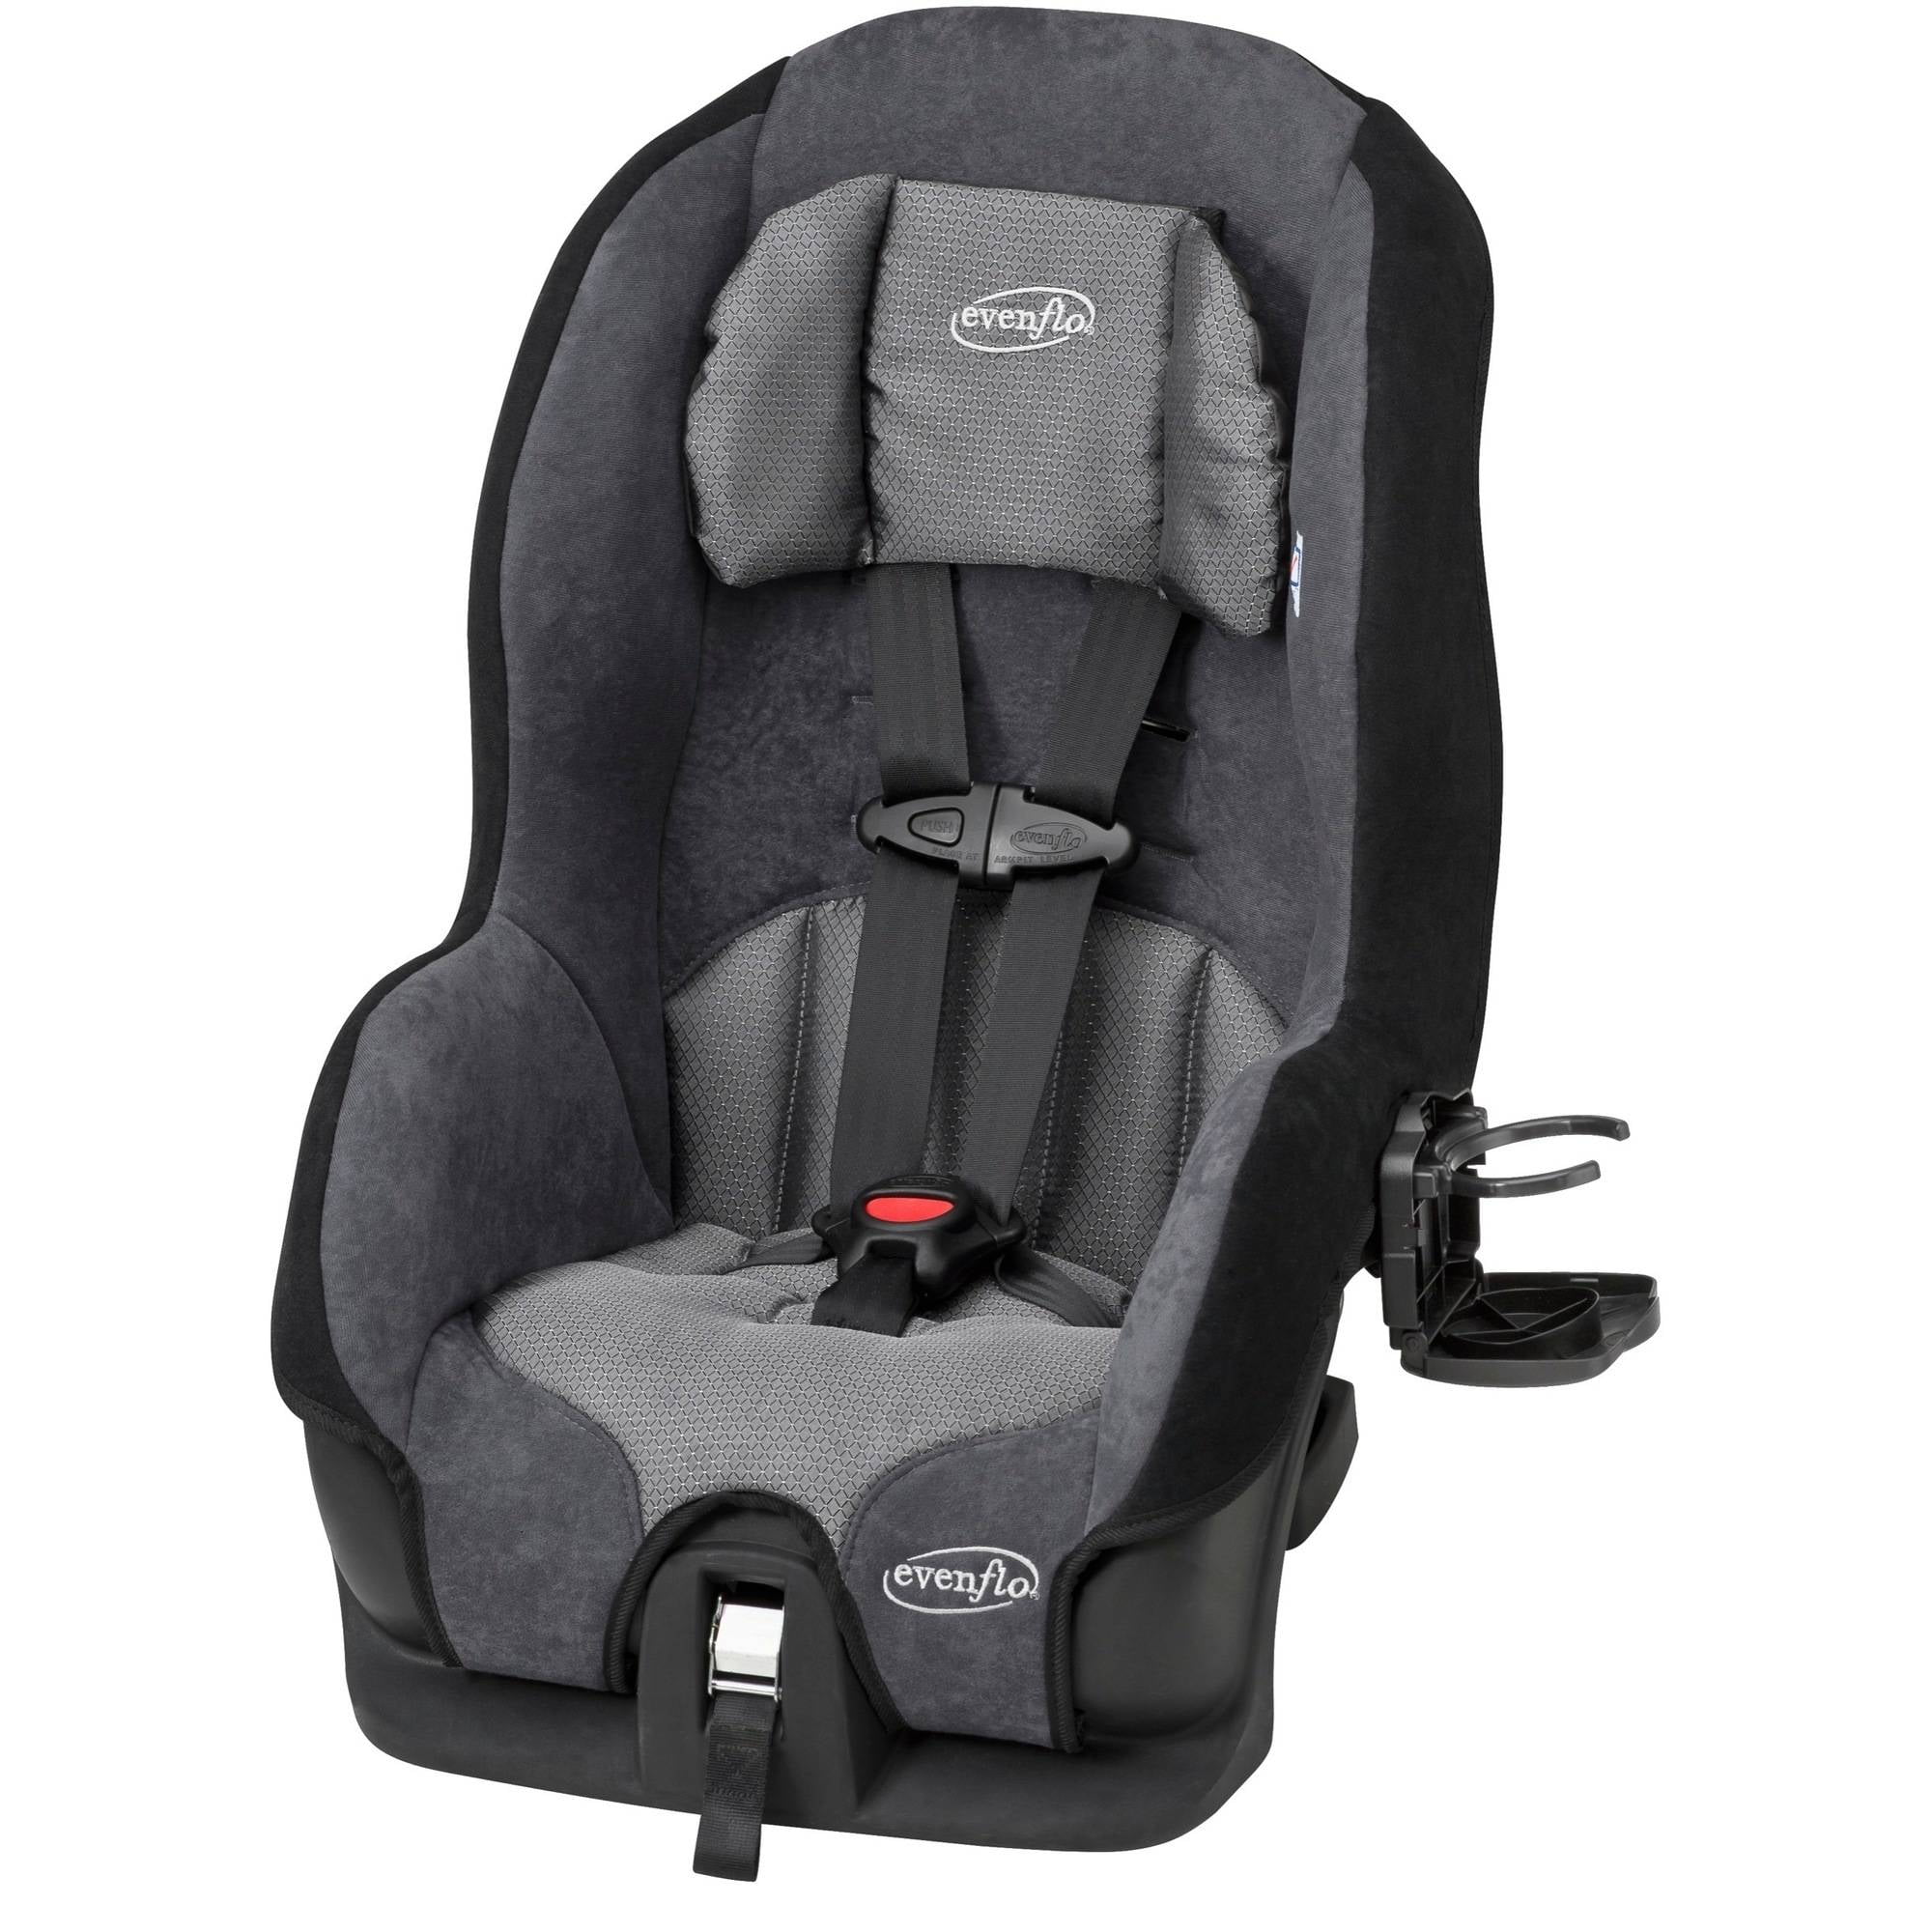 Photo 1 of (READ FULL POST) Evenflo Tribute LX Harness Convertible Car Seat, Solid Print Gray